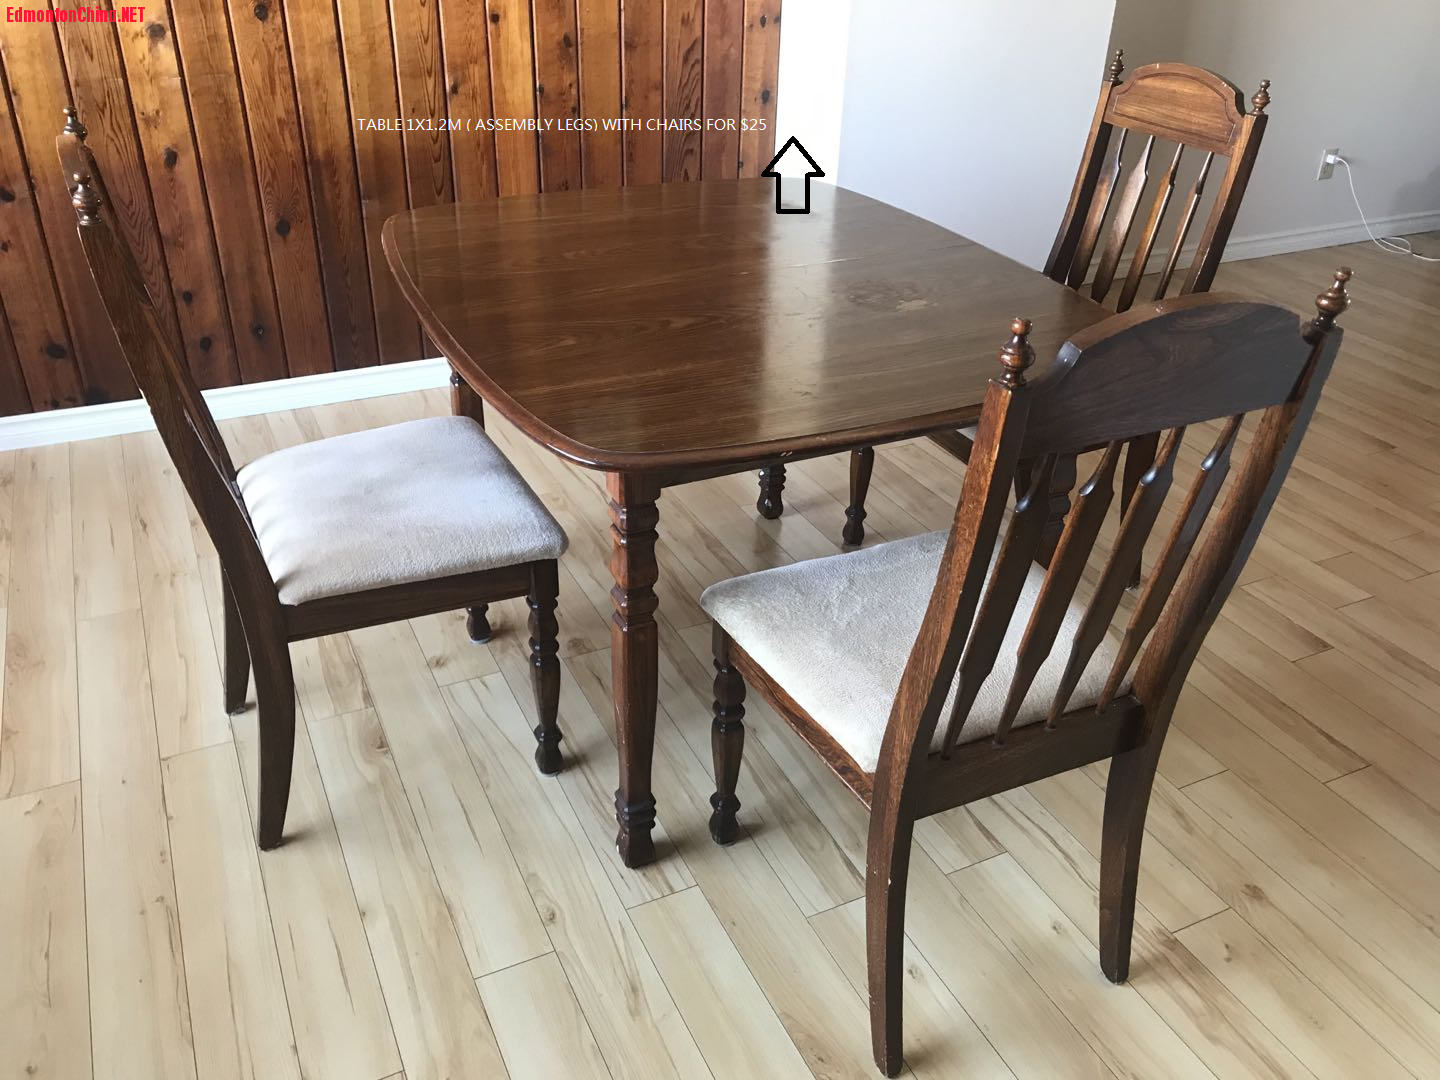 DINING TABLE 1MX1.2M with chairs $25.png